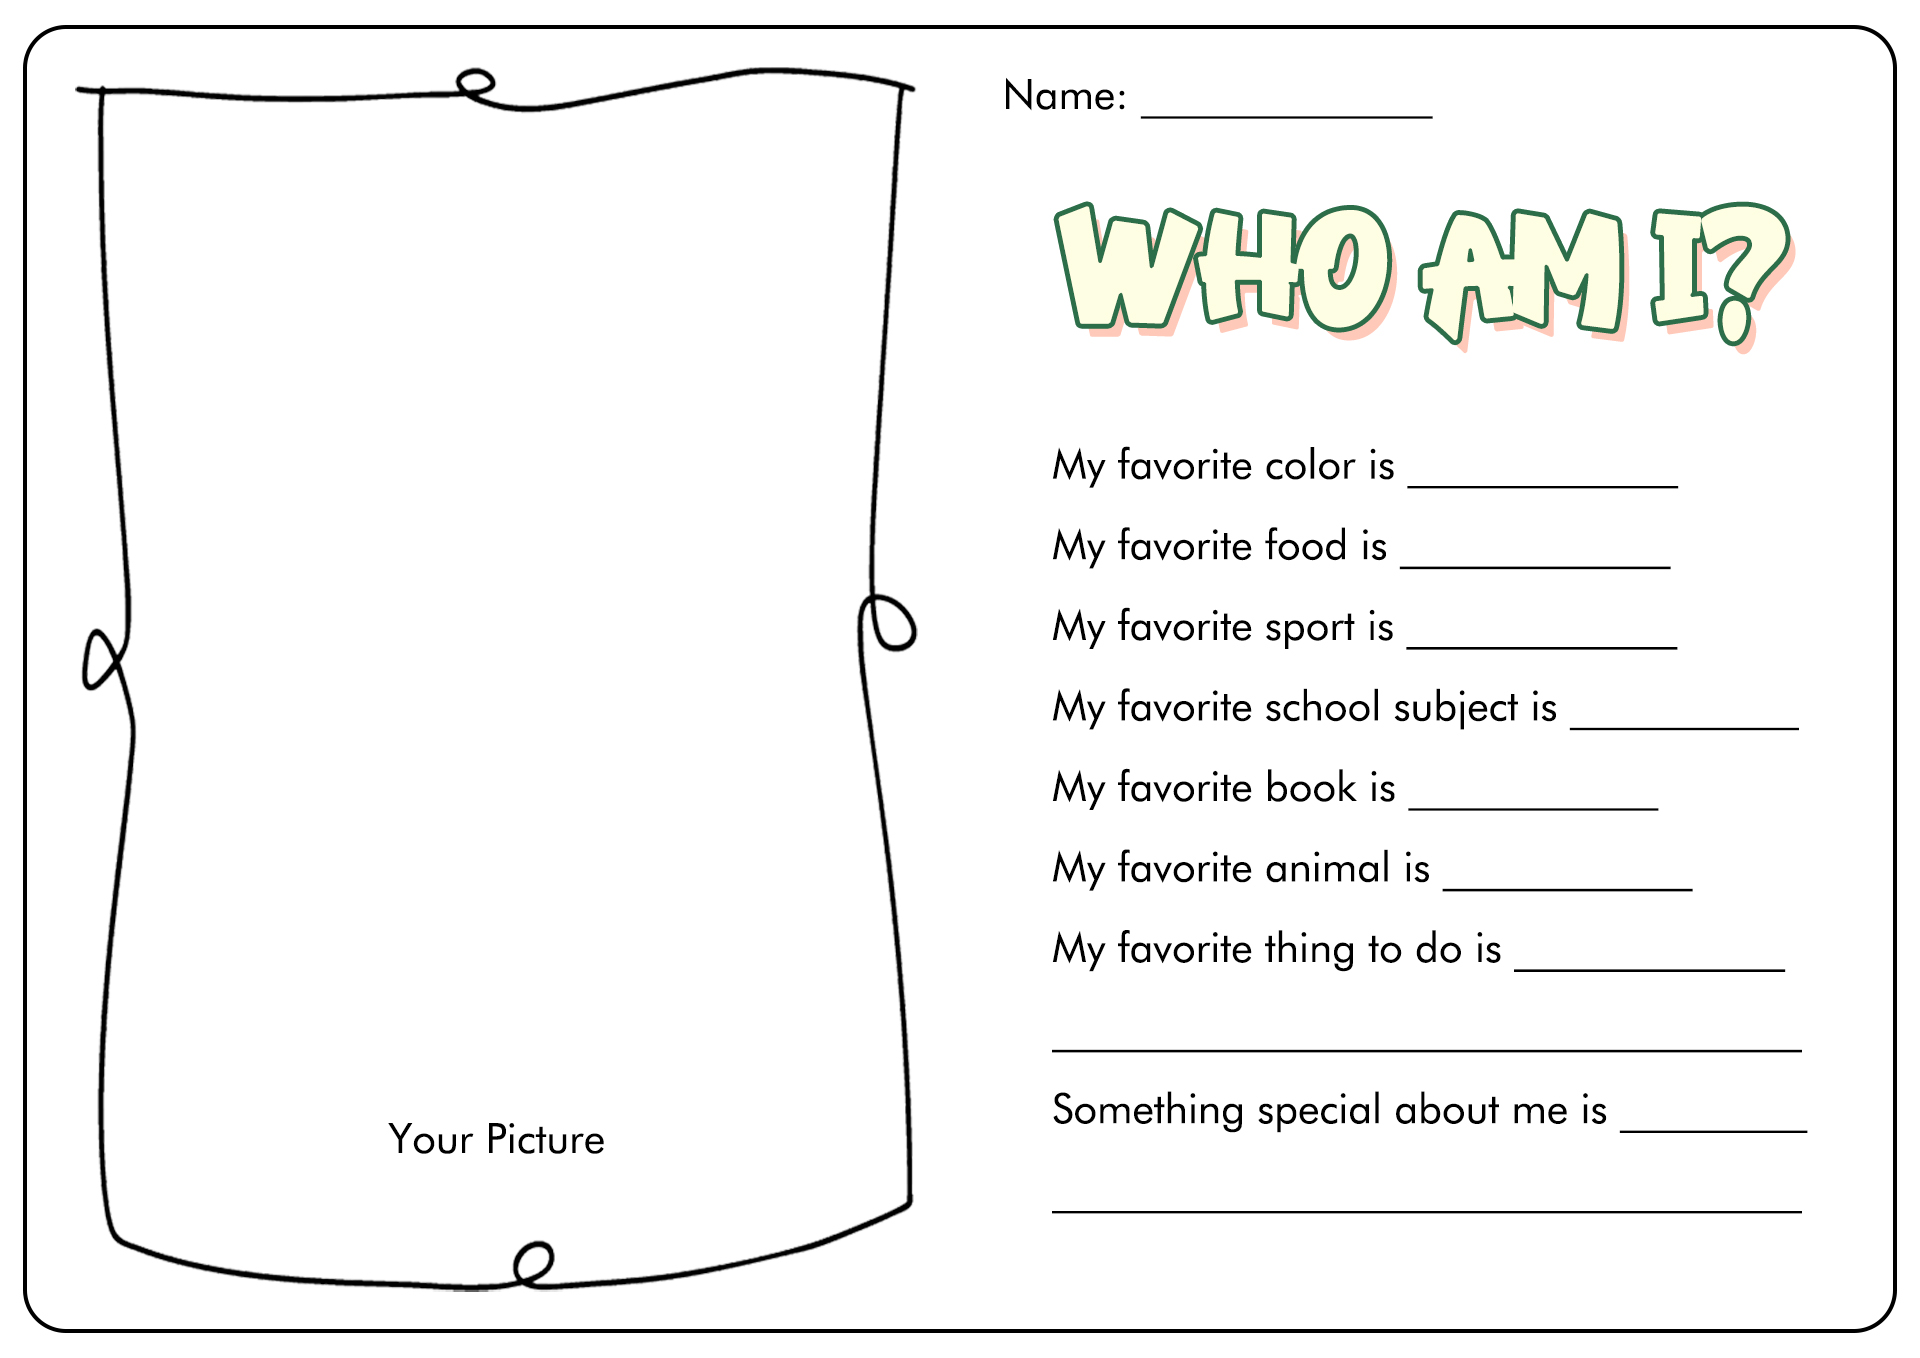 Who AM I Worksheet Activities Image